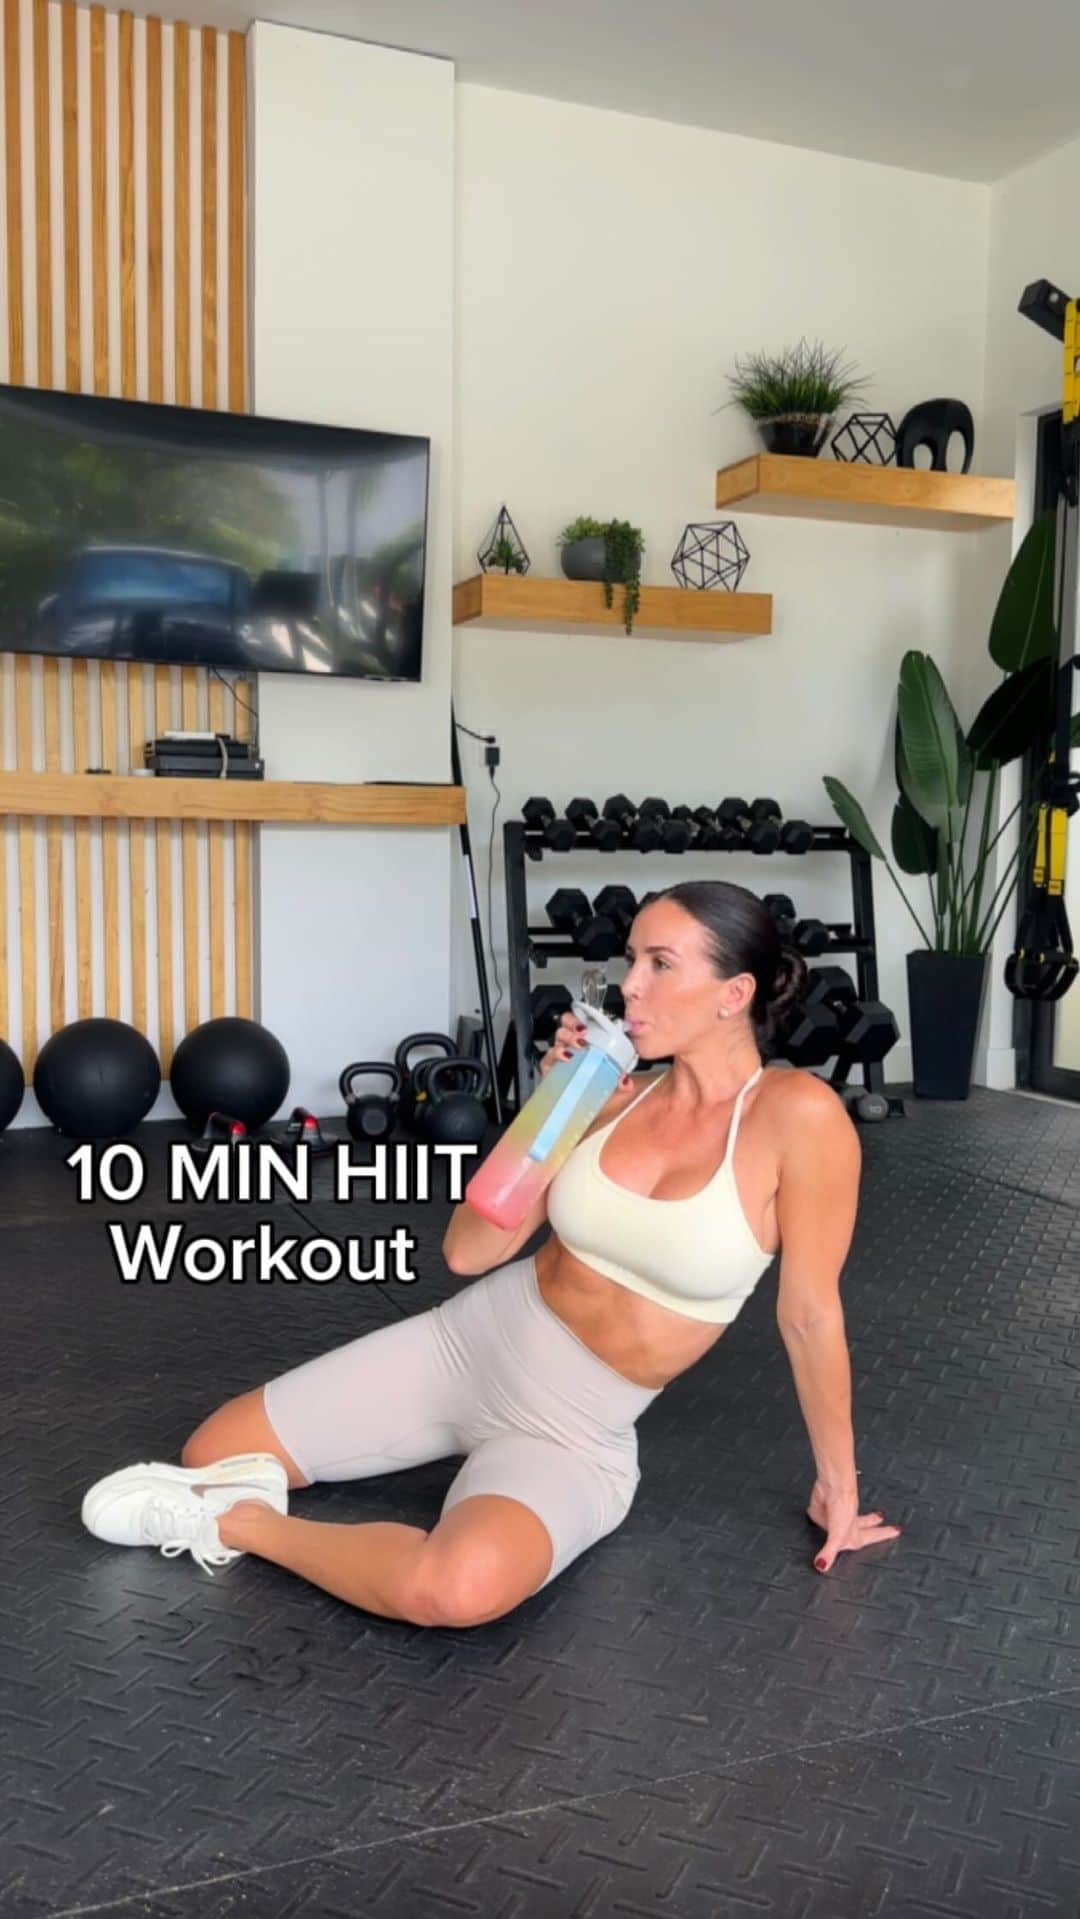 Ainsley Rodriguezのインスタグラム：「10 MIN FULL BODY! Save & Complete this workout before Thanksgiving tomorrow! . Set your timer for 10 minutes and get through as many rounds as possible! I find that I tend to push myself more when I know it’s short and efficient 🤷🏻‍♀️  . I call this a ‘no excuses’ workout. It requires ZERO equipment and only 10 minutes of your time and your heart will be PUMPING! Get in a quick sweat in the morning or after putting the turkey in the oven and enjoy the feast! 😋 . #fullbodyworkout #hiitworkout #amrap」